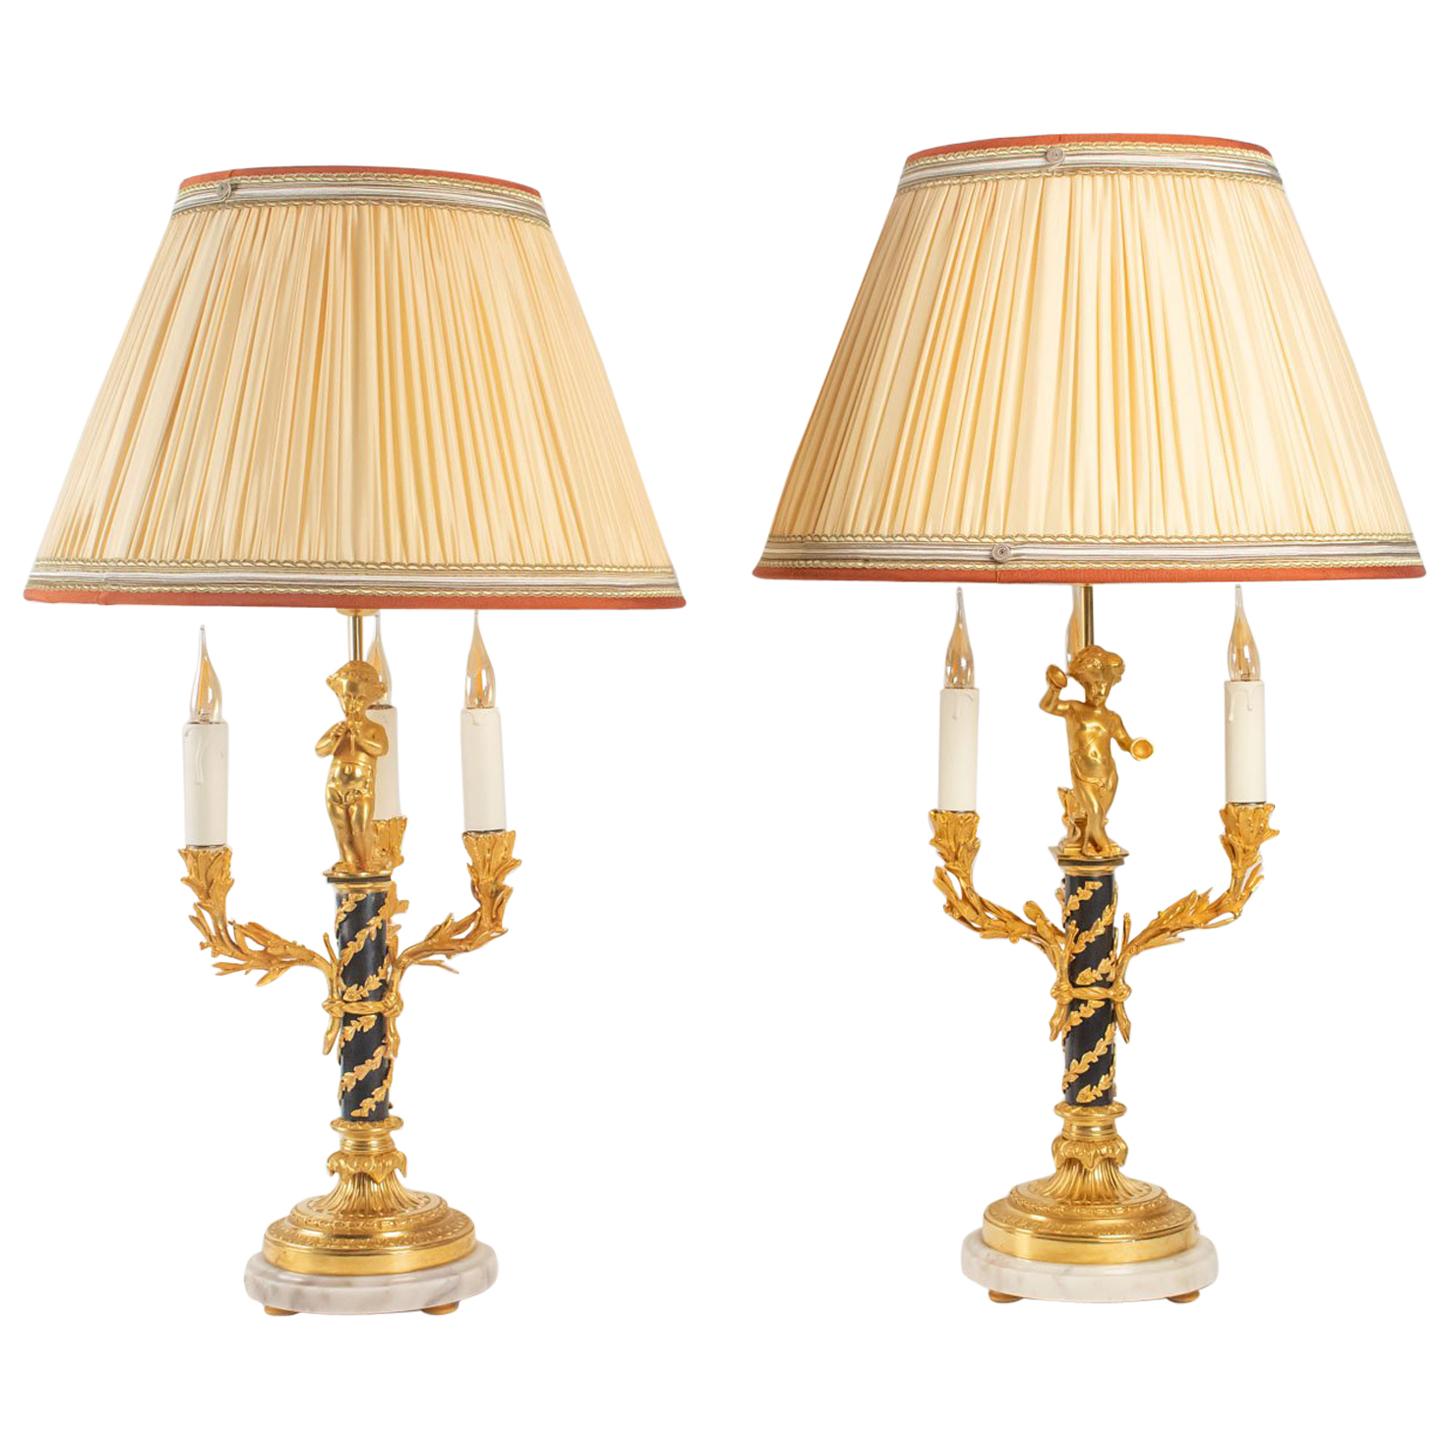 Pair of Lamps in Love, 3 Lights, Gilt Bronze, Patinated, Louis XVI Style